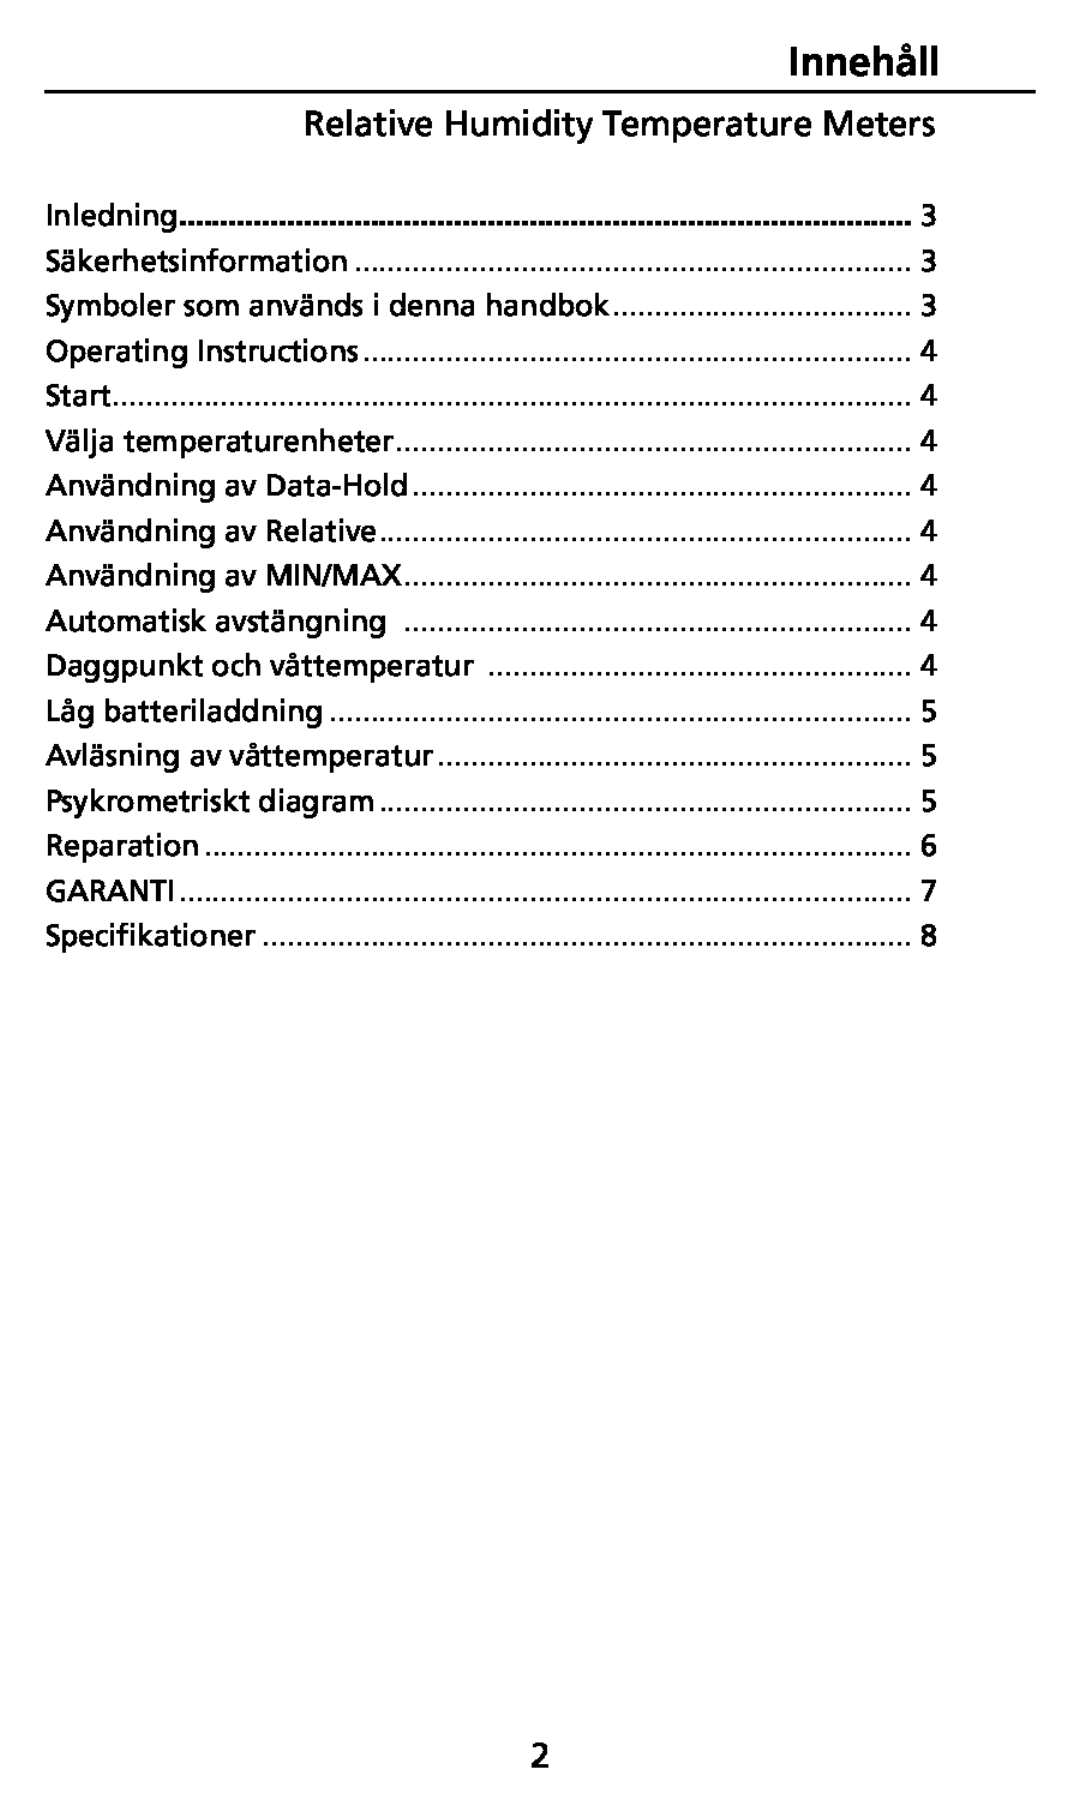 Ampro Corporation TH-3, THWD-3 user manual Innehåll, Relative Humidity Temperature Meters, Inledning 